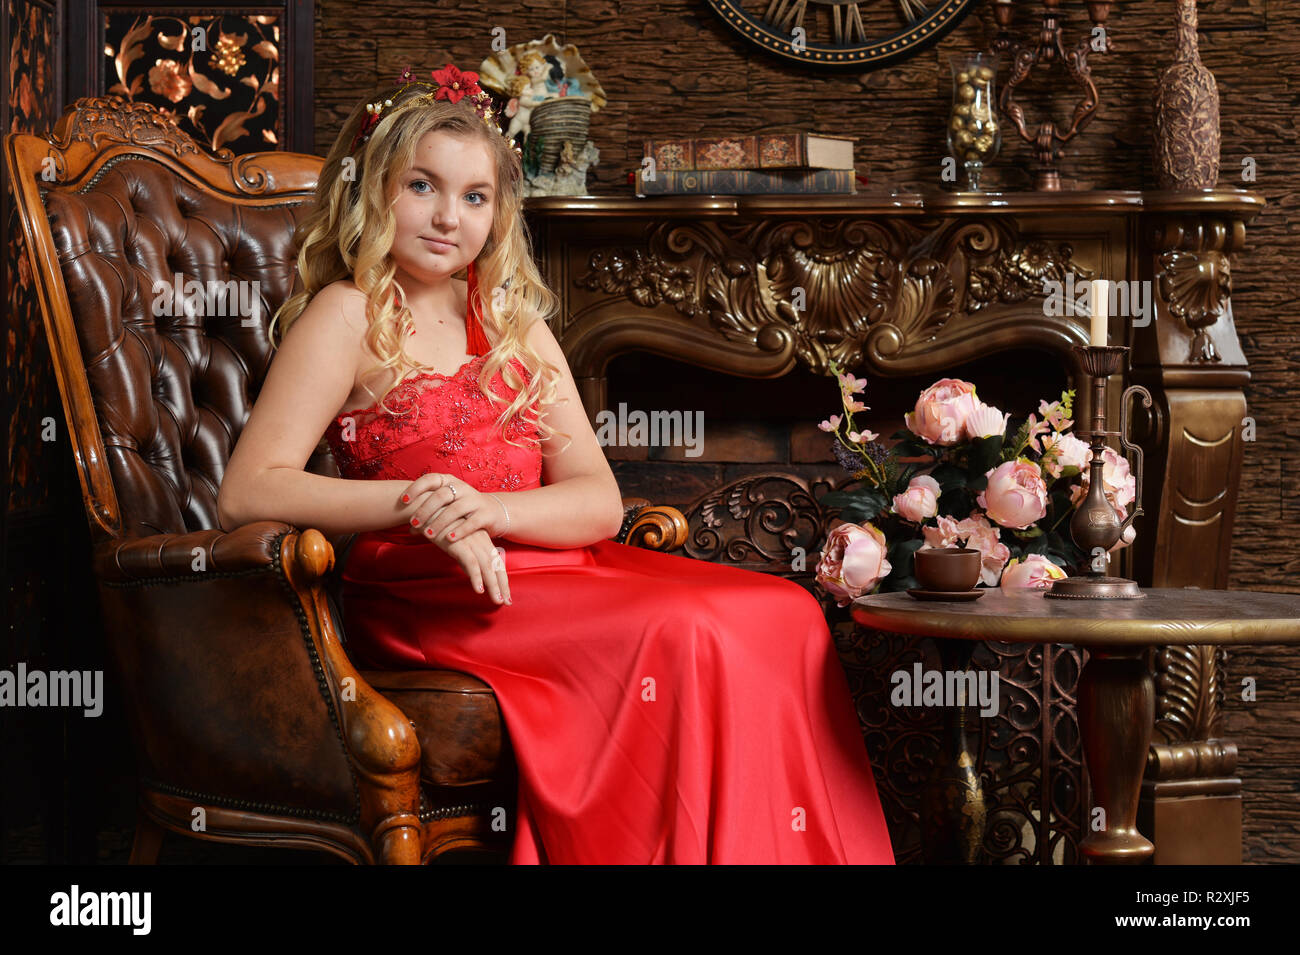 Blonde teenage girl in bright red dress sitting in armchair Stock Photo